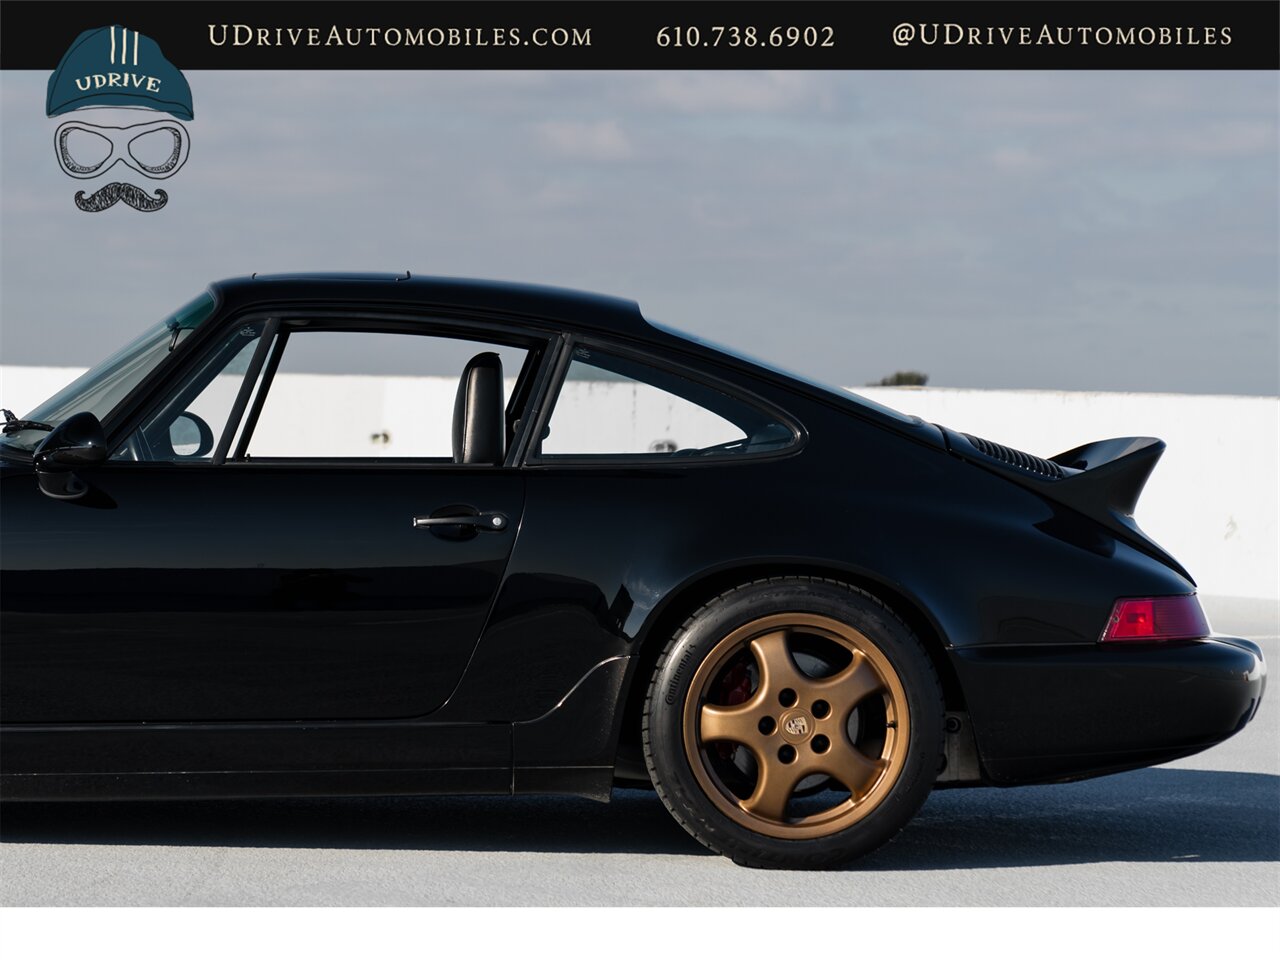 1989 Porsche 911 C4  964 Carrera 4 C4 5 Speed Manual $33k in Recent Service History - Photo 25 - West Chester, PA 19382